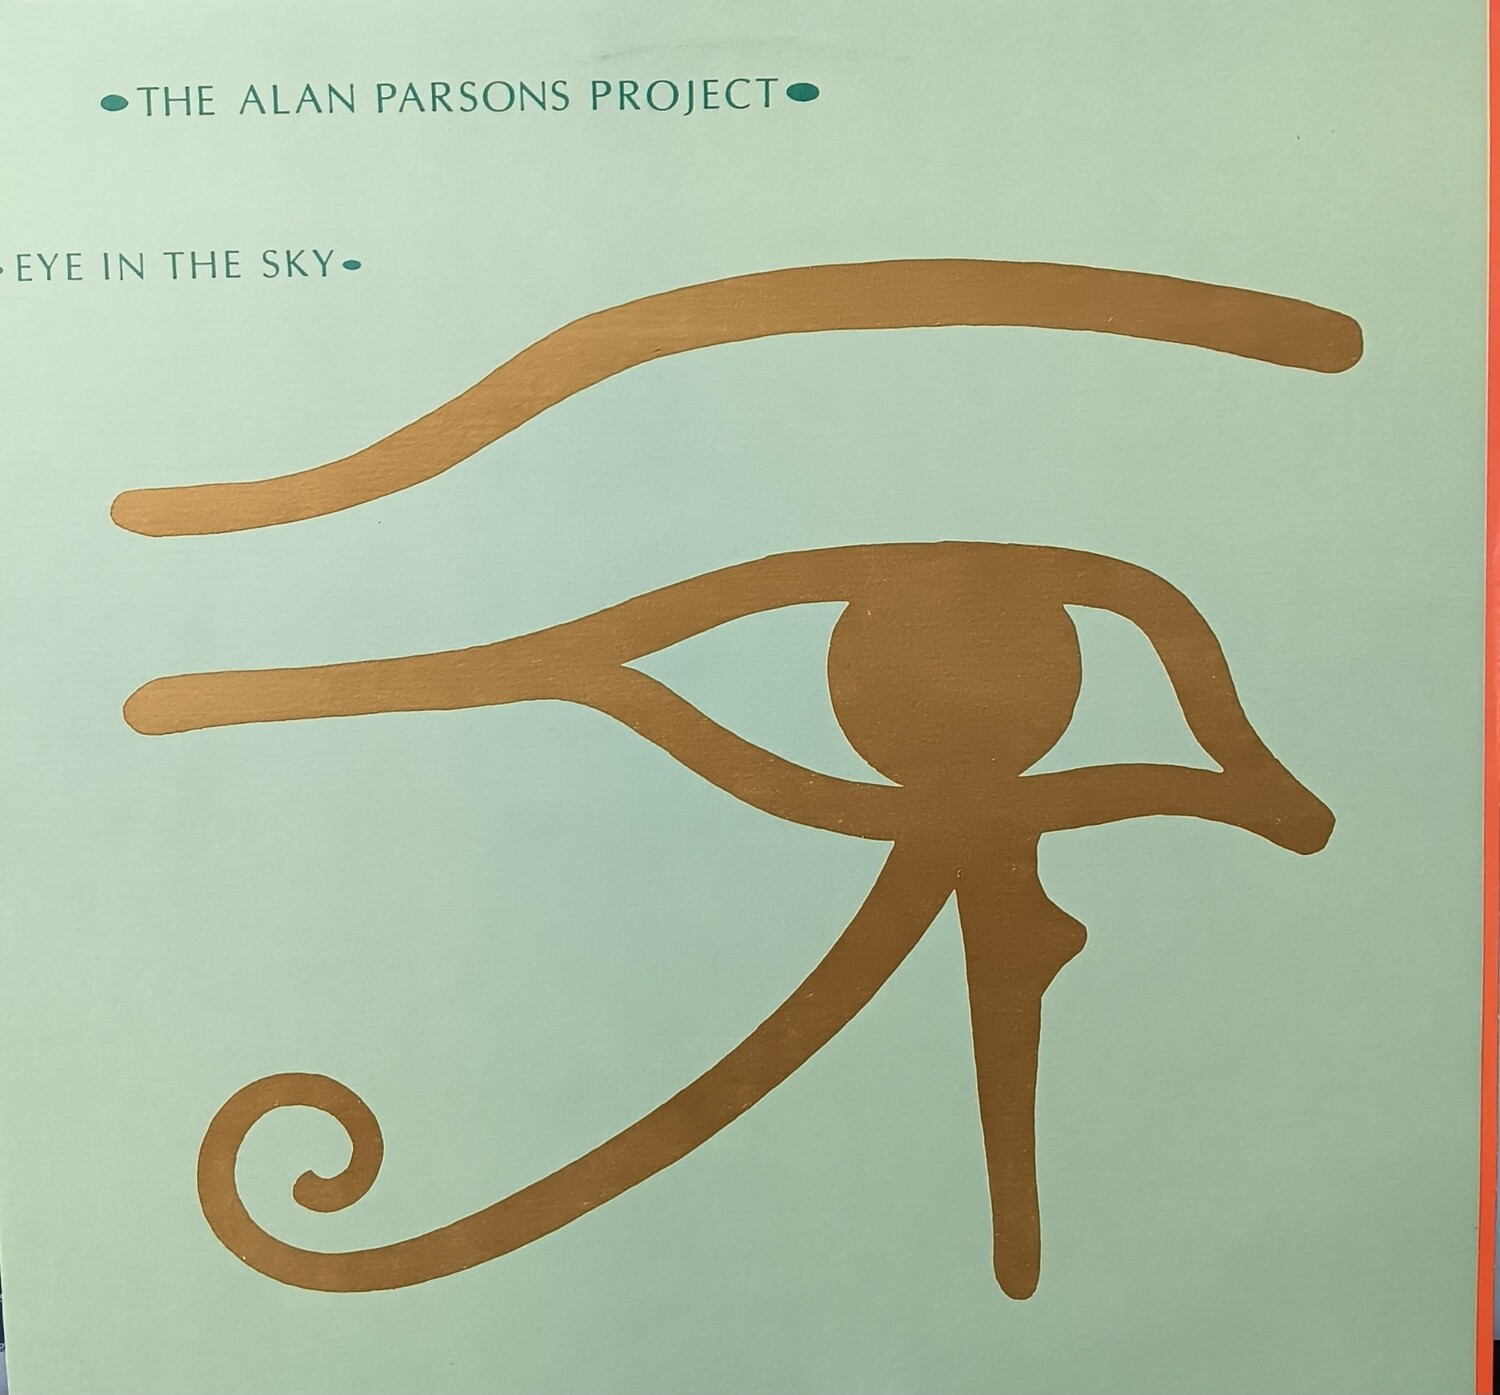 THE ALAN PARSONS PROJECT - Eye in the sky